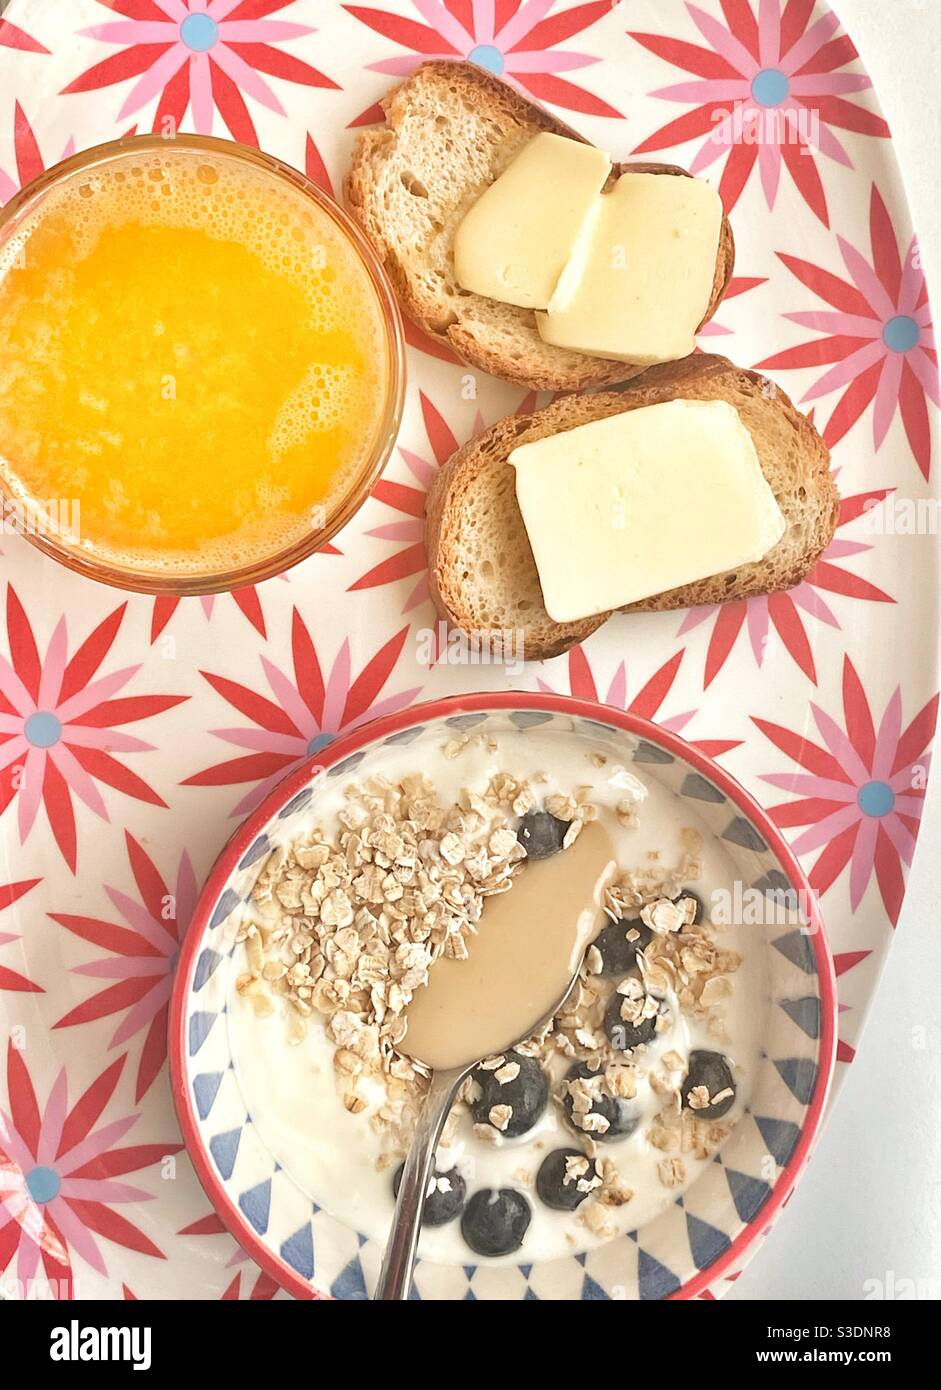 Yummy breakfast with fresh orange juice, oat flakes, bread and butter Stock Photo